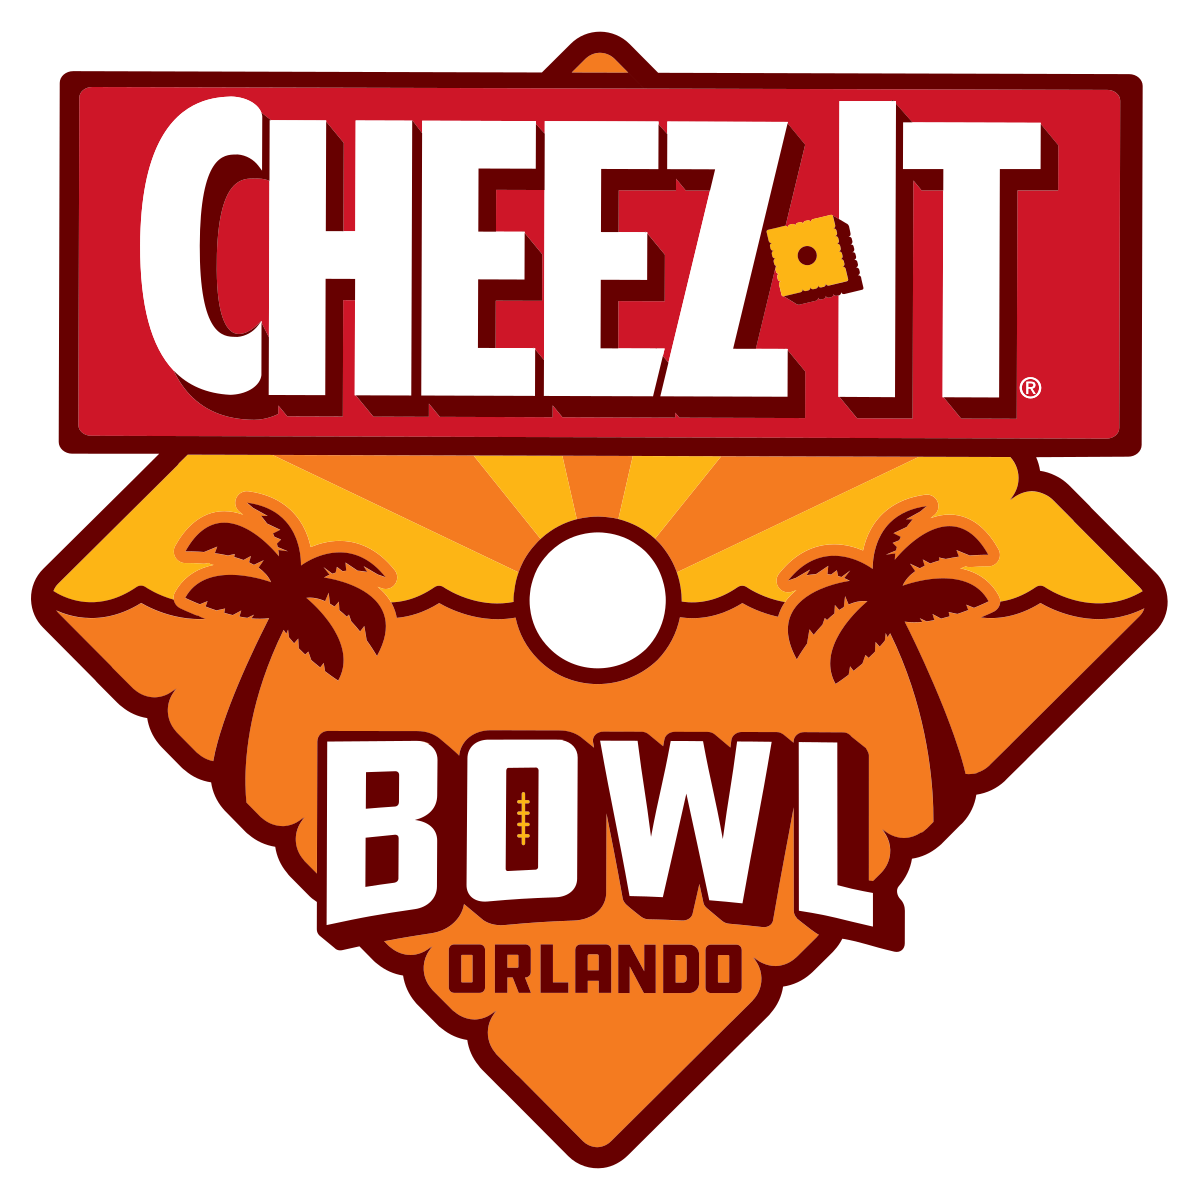 CheezIt Bowl 2020 Live Stream with VPN, Watch ESPN Anywhere